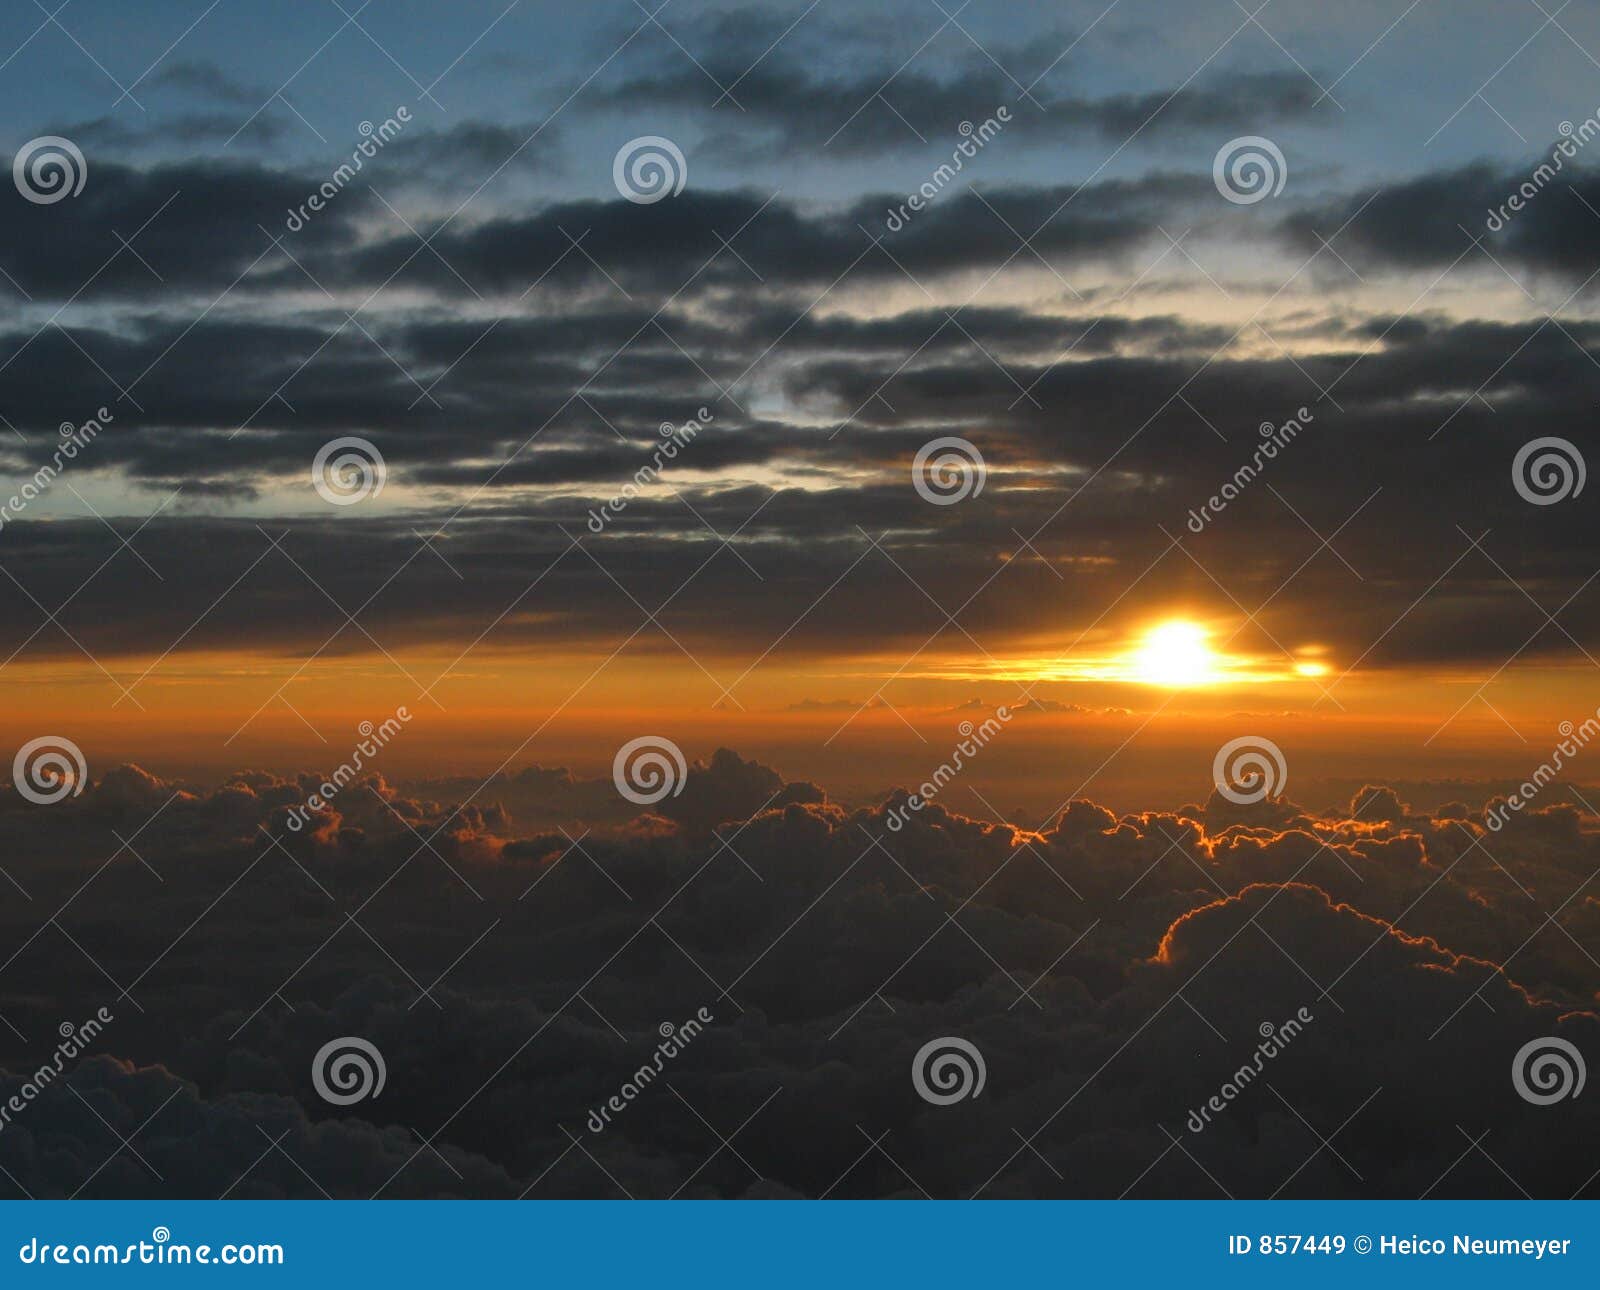 wonderful sunset above the clouds, peaceful meditative atmosphere